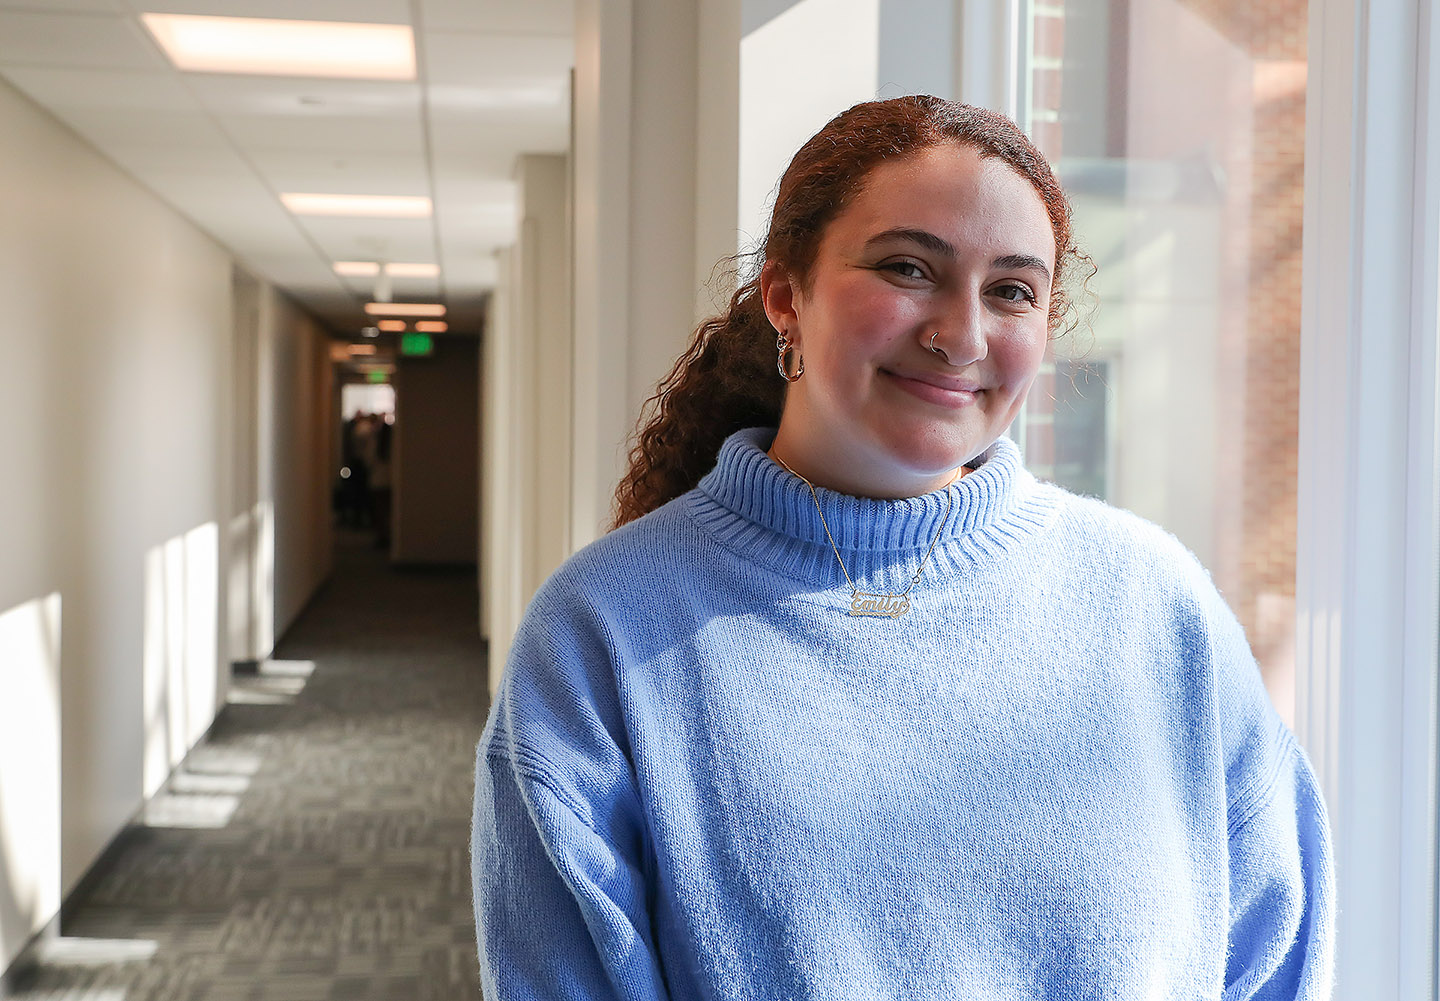 “I feel like my four years at UNK were defined by relationships – genuine, authentic relationships. Throughout my time here, I’ve been surrounded by people who actually care about me and what I want to do and they want to do everything they can to help me along that path.”